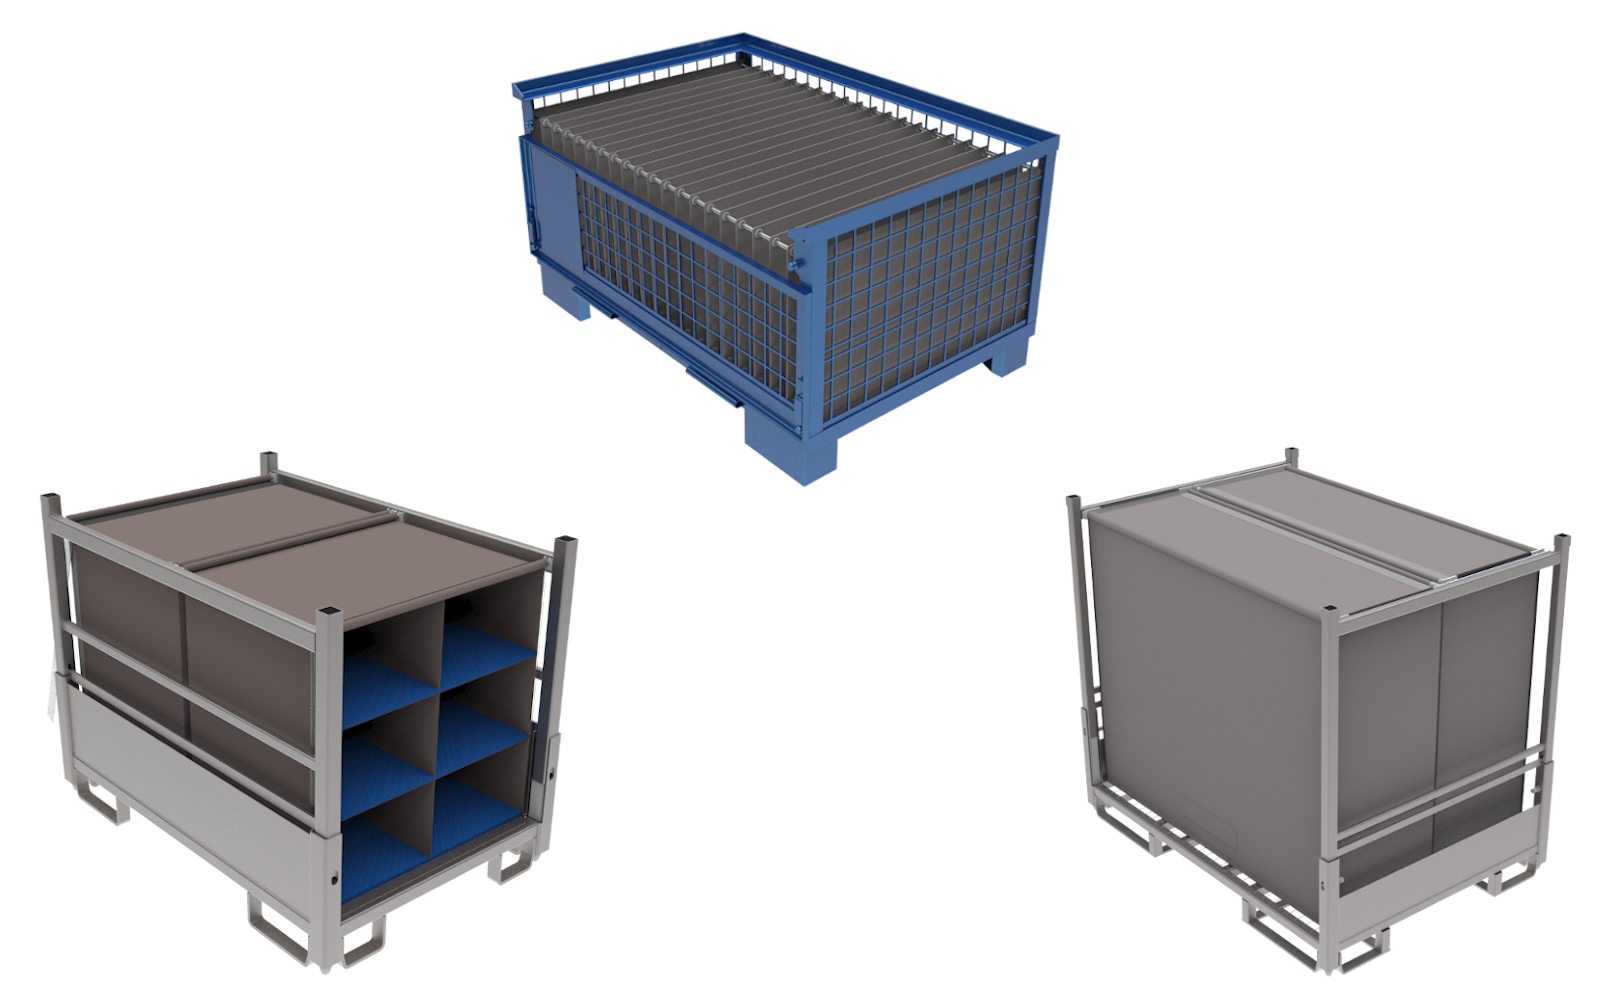 Applications for metal pallet boxes